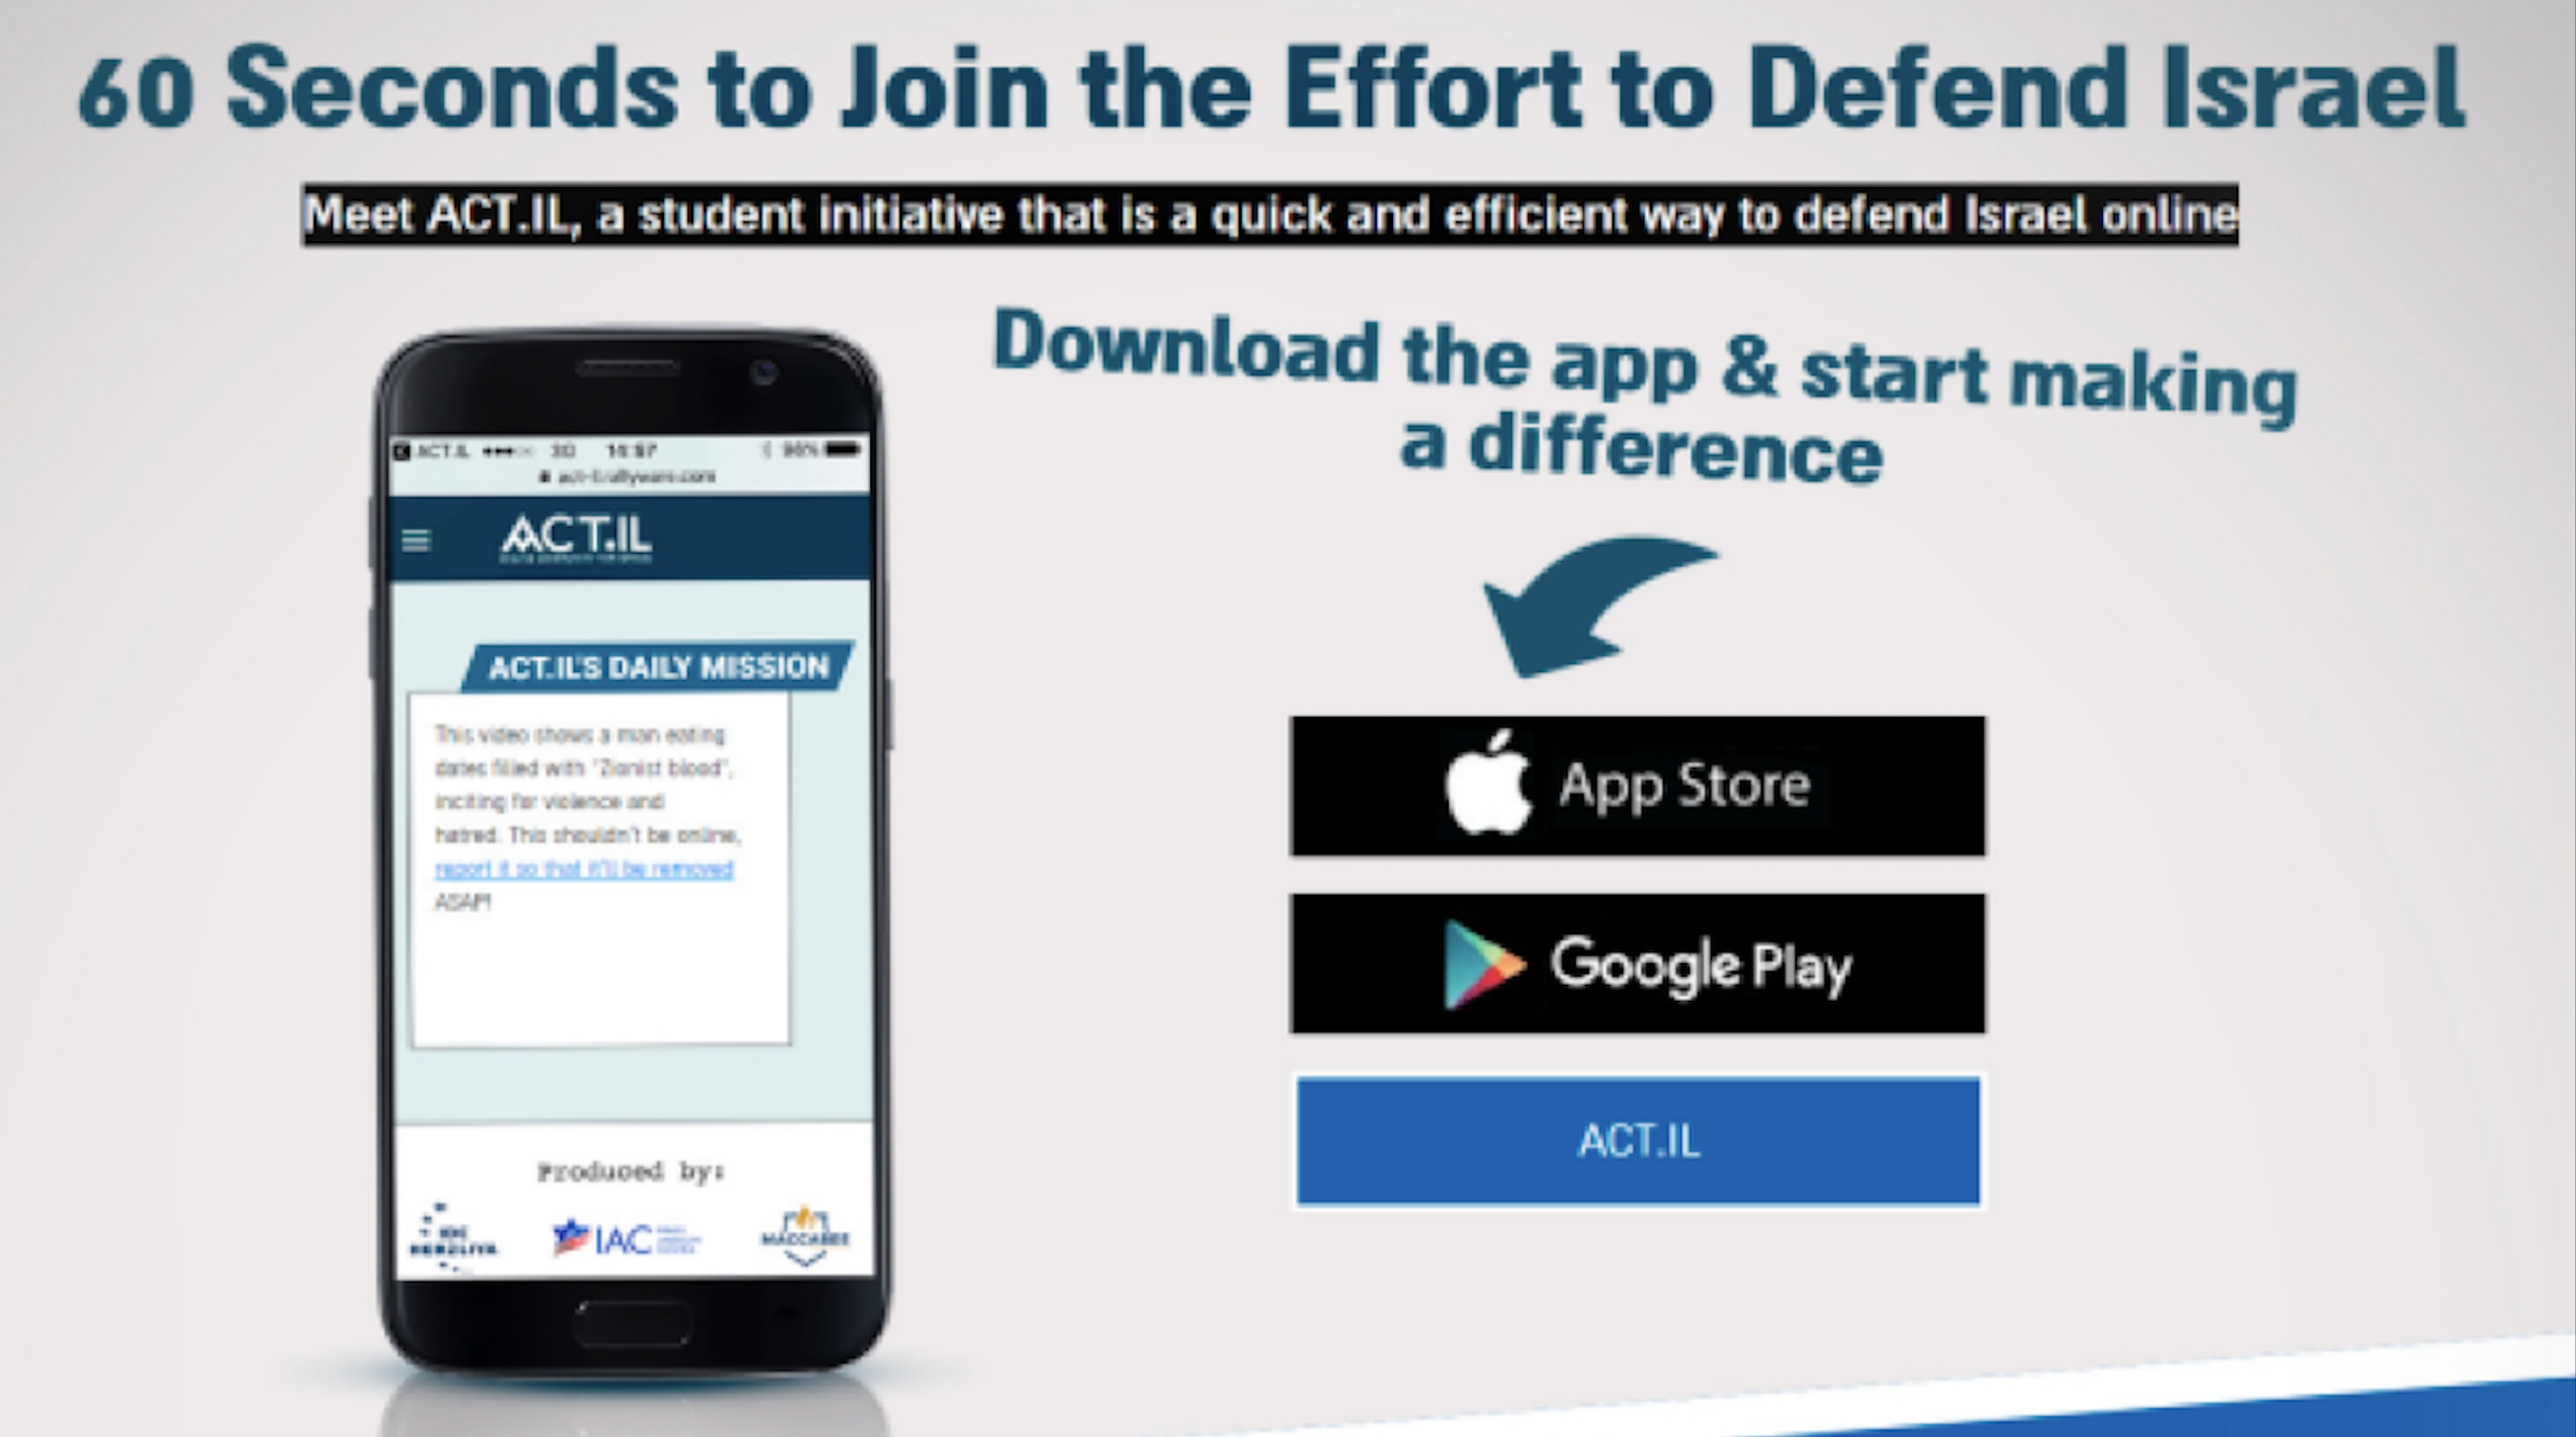 How a “Political Astroturfing” App Coordinates Pro-Israel Influence Operations.